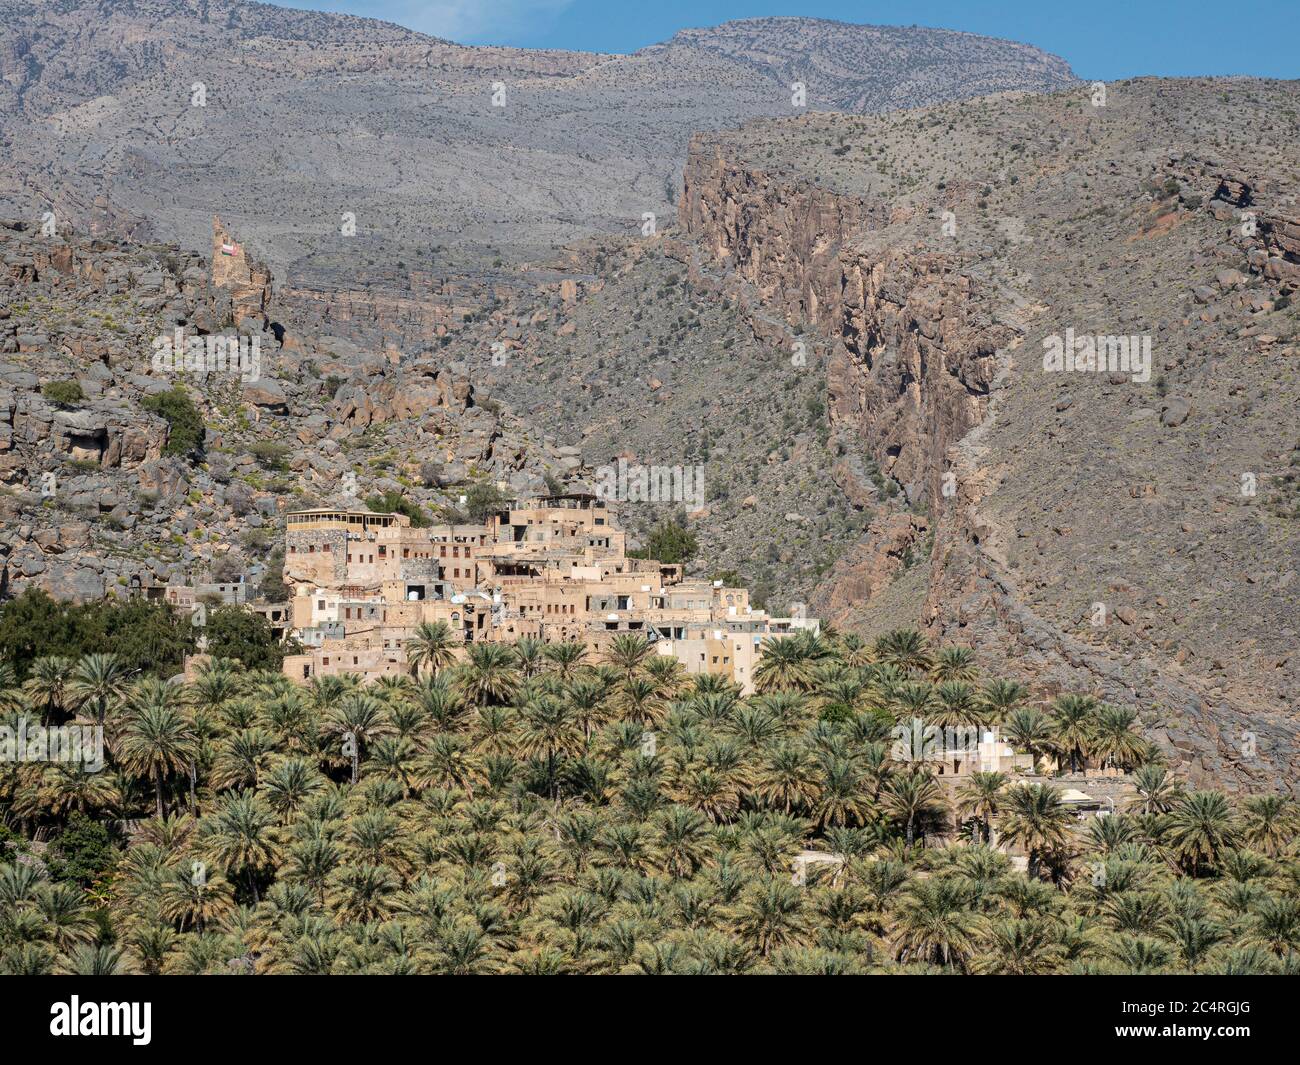 Date palms surround the old village of Al Misfah, Sultanate of Oman. Stock Photo